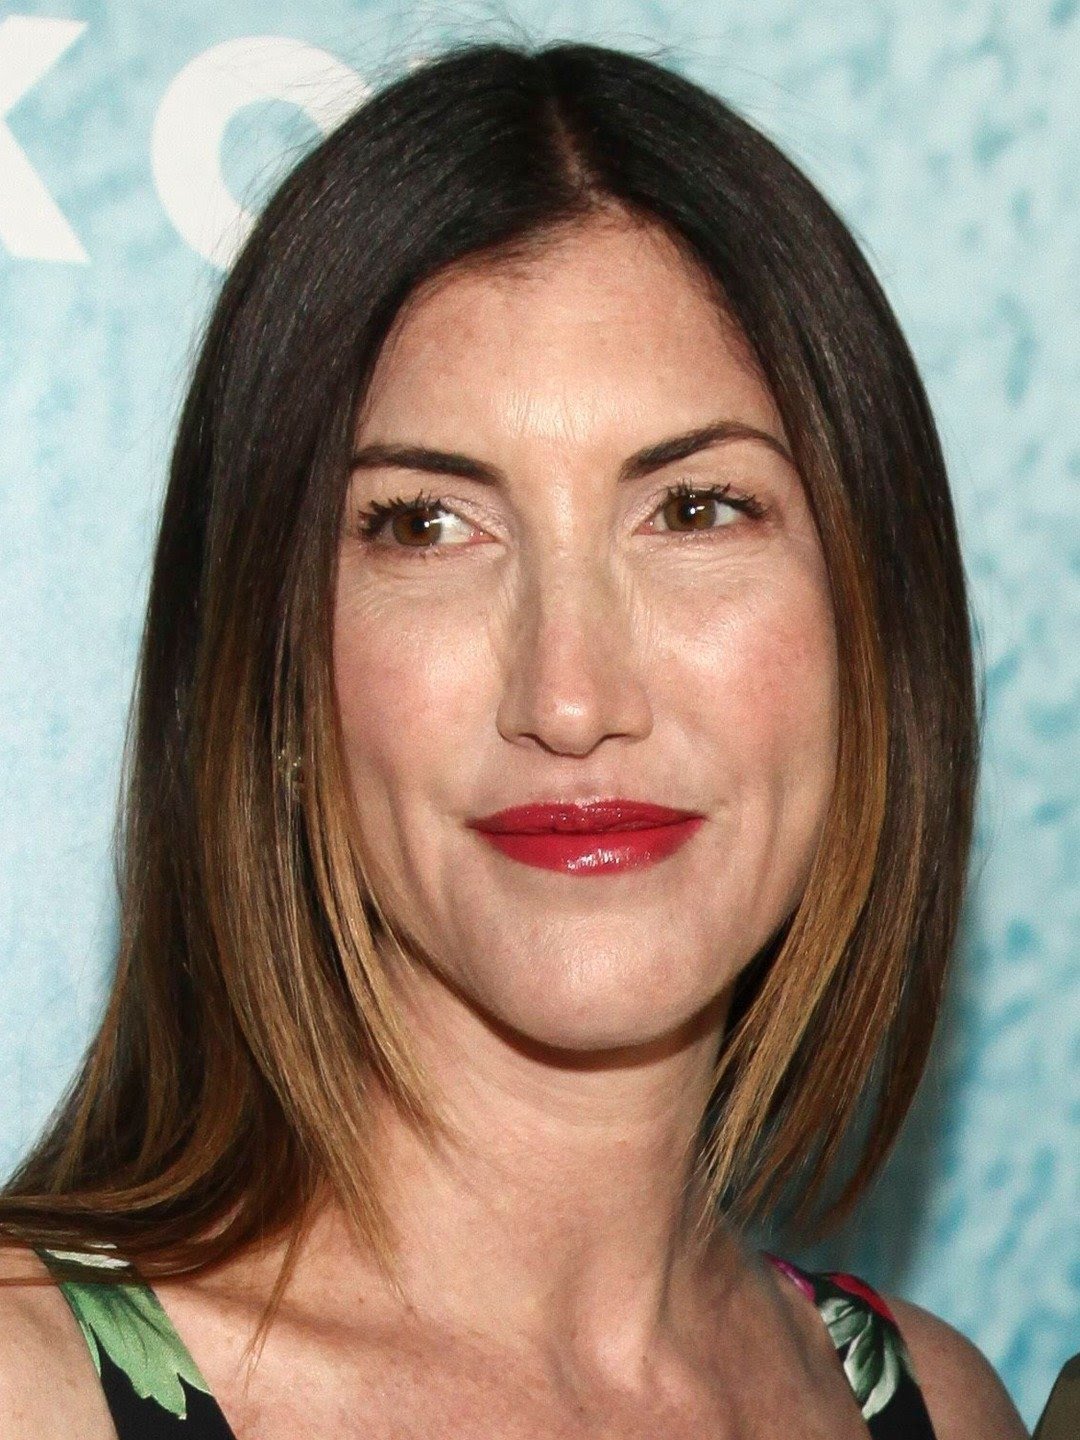 Jackie Sandler: The Model Turned Actress Who Married a Comedy Star